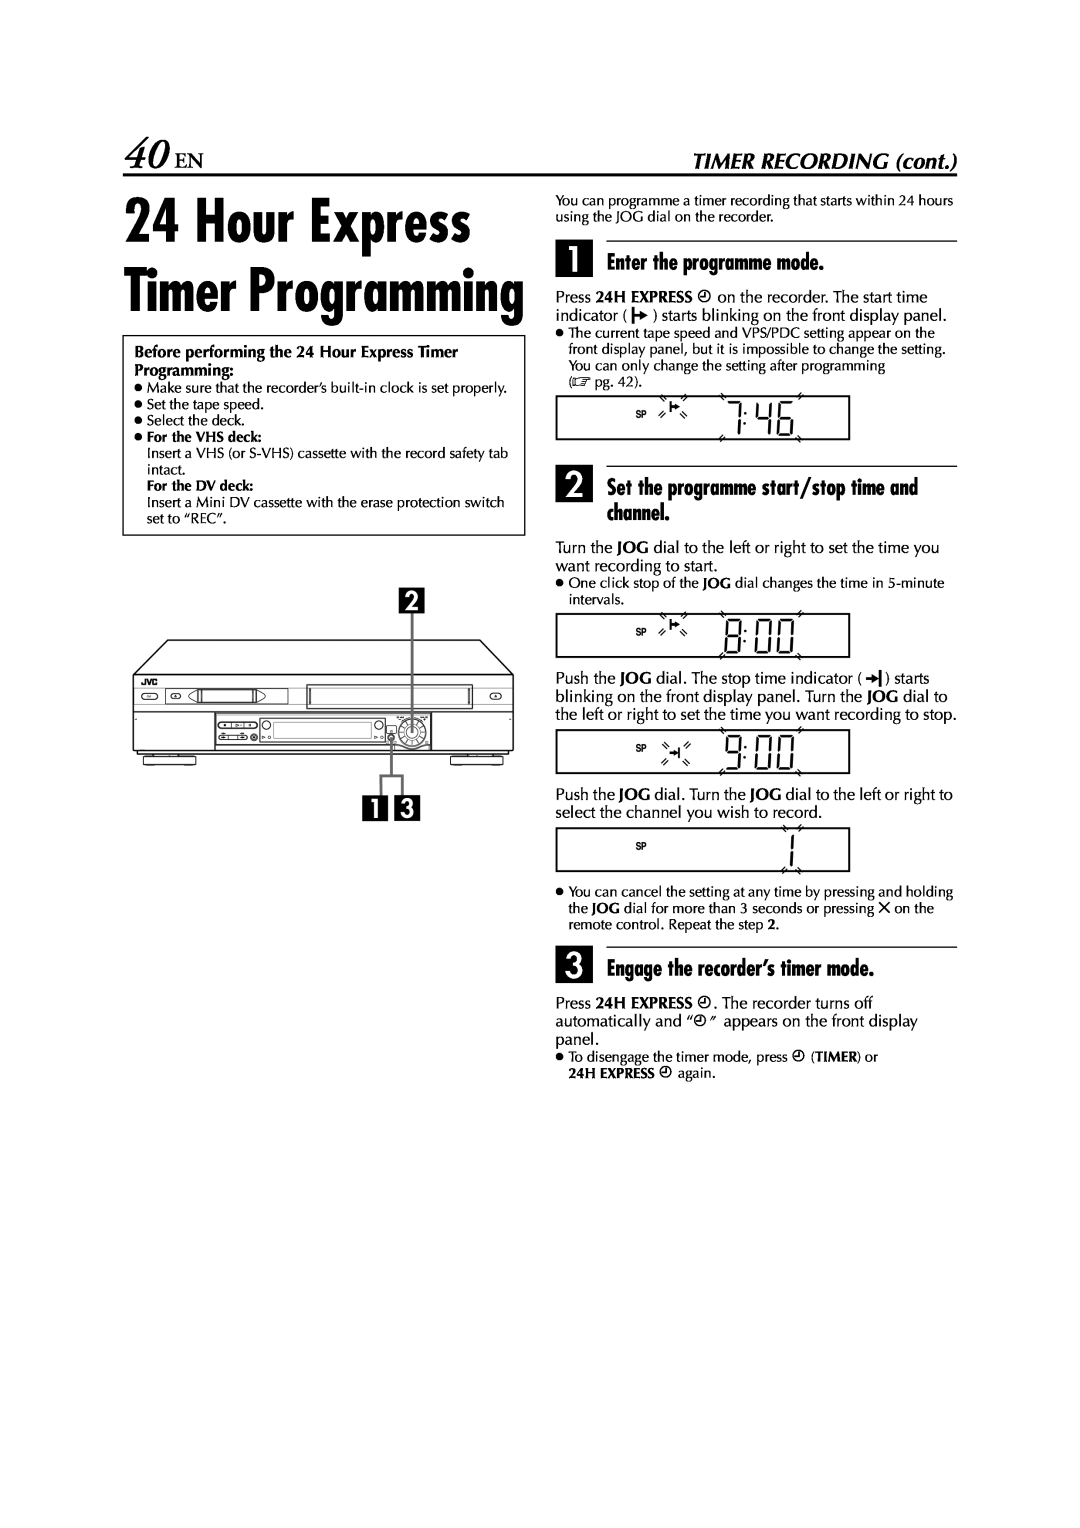 JVC LPT0616-001A 40 EN, Hour Express Timer Programming, A Enter the programme mode, C Engage the recorder’s timer mode 